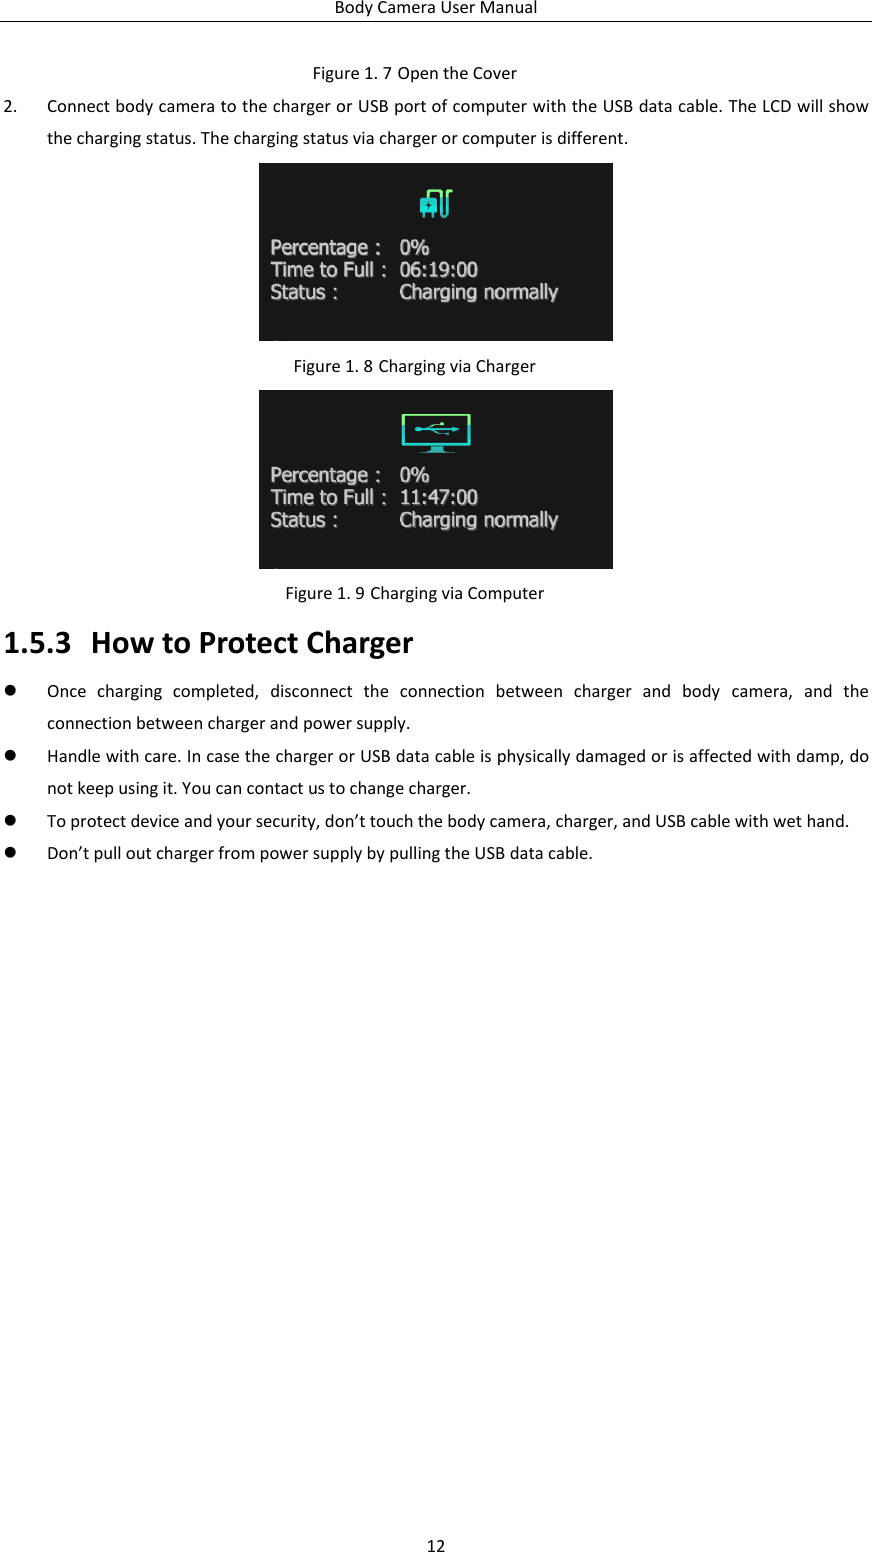 Body Camera User Manual 12 Figure 1. 7 Open the Cover 2. Connect body camera to the charger or USB port of computer with the USB data cable. The LCD will show the charging status. The charging status via charger or computer is different.  Figure 1. 8 Charging via Charger  Figure 1. 9 Charging via Computer 1.5.3 How to Protect Charger  Once  charging  completed,  disconnect  the  connection  between  charger  and  body  camera,  and  the connection between charger and power supply.  Handle with care. In case the charger or USB data cable is physically damaged or is affected with damp, do not keep using it. You can contact us to change charger.  To protect device and your security, don’t touch the body camera, charger, and USB cable with wet hand.    Don’t pull out charger from power supply by pulling the USB data cable.  